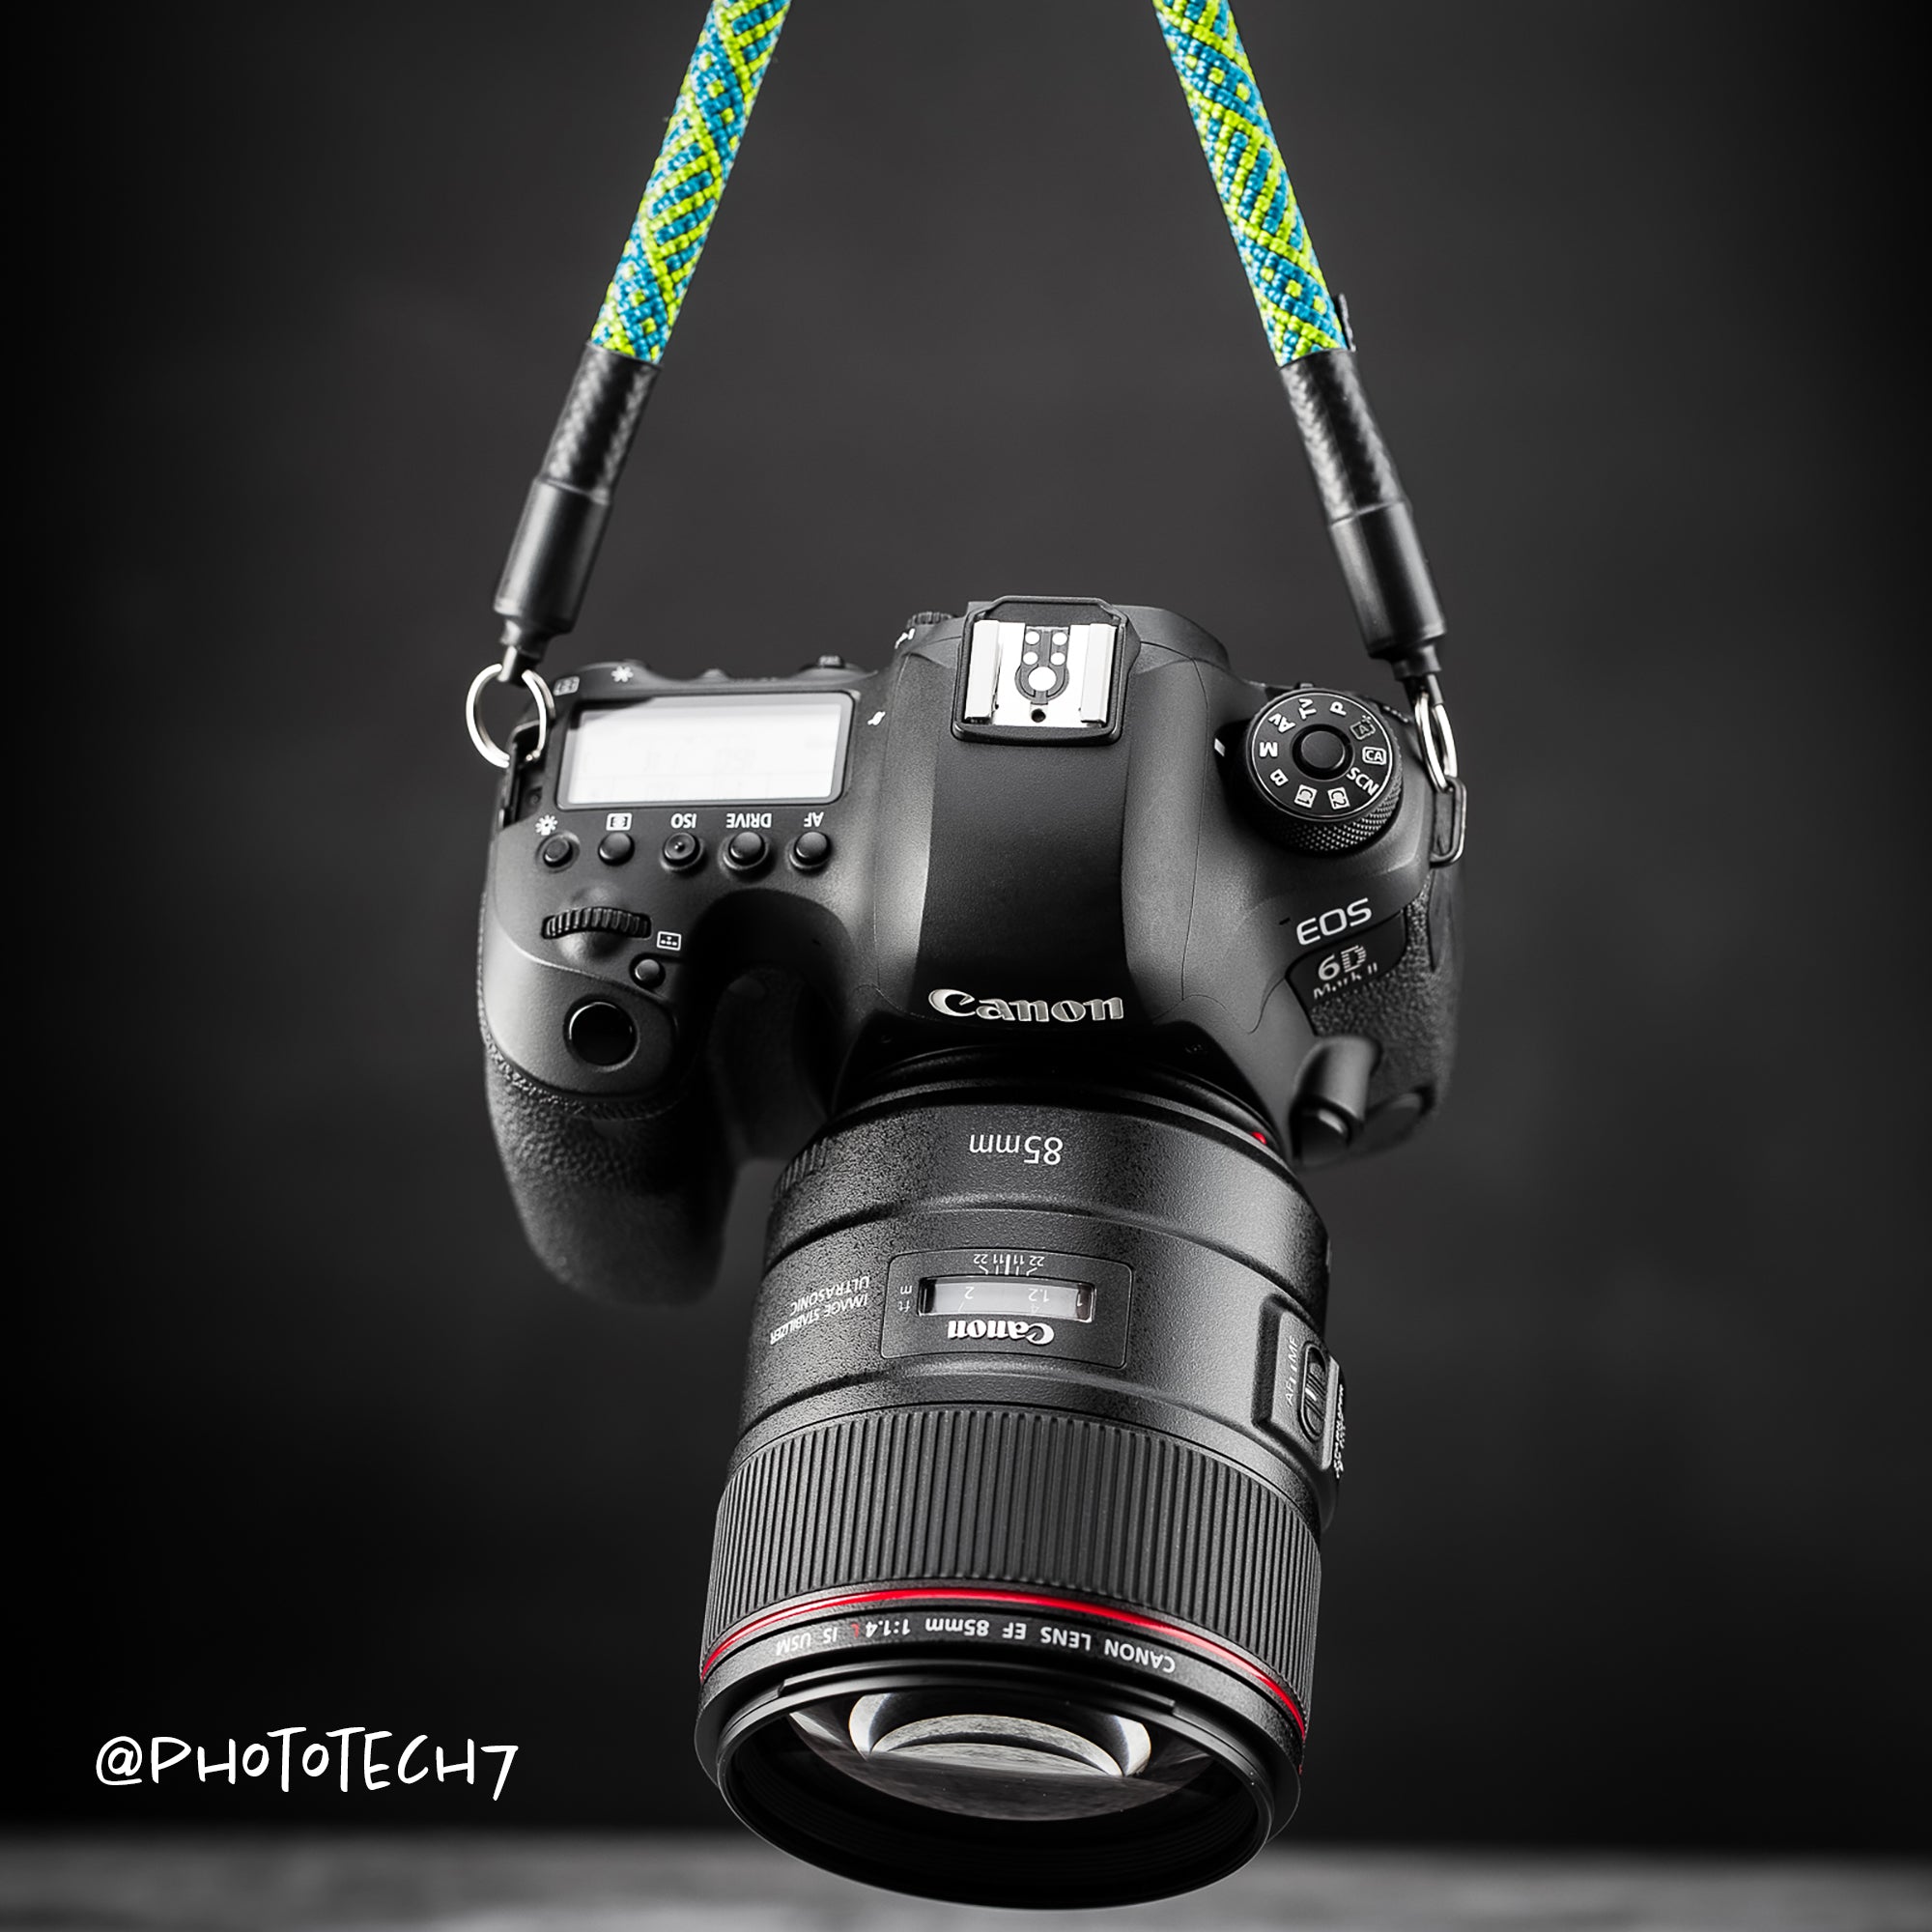 Custom Rope Camera Straps: Made by hand in the USA – Tuenne